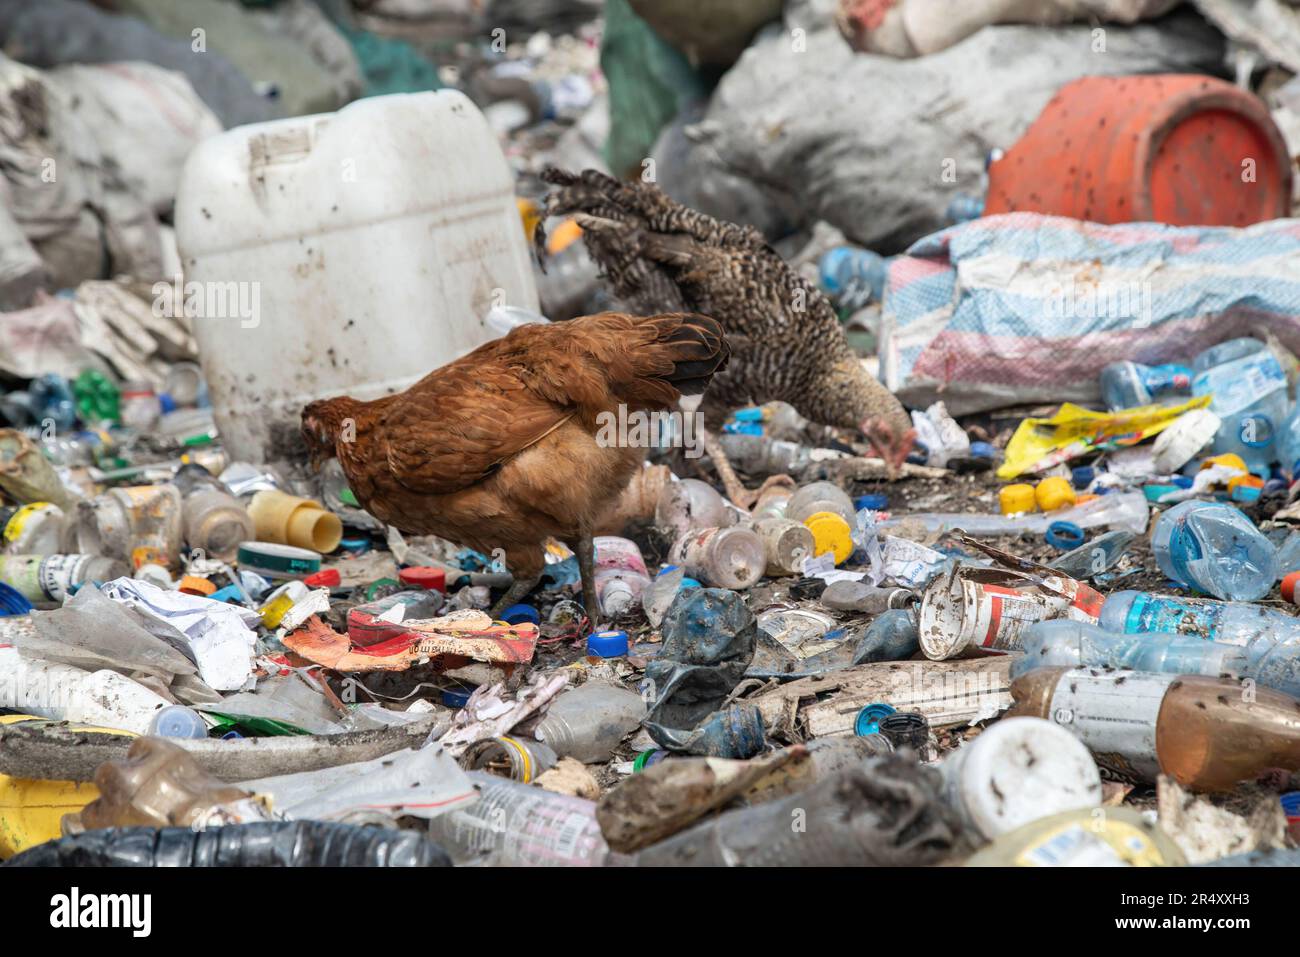 May 30, 2023, Nakuru, Kenya: Chicken seen feeding at a plastic recycling plant in Nakuru. Negotiators have gathered in Paris, France for the second round of deliberations to develop a global treaty aimed at tackling the escalating issue of plastic pollution. According to a recent report by the United Nations Environment Programme (UNEP), countries have the potential to reduce plastic pollution by 80% by 2040 by eliminating unnecessary plastics, implementing recycling and reuse strategies, introducing deposit return schemes, and substituting plastic with sustainable alternative materials. (Cred Stock Photo